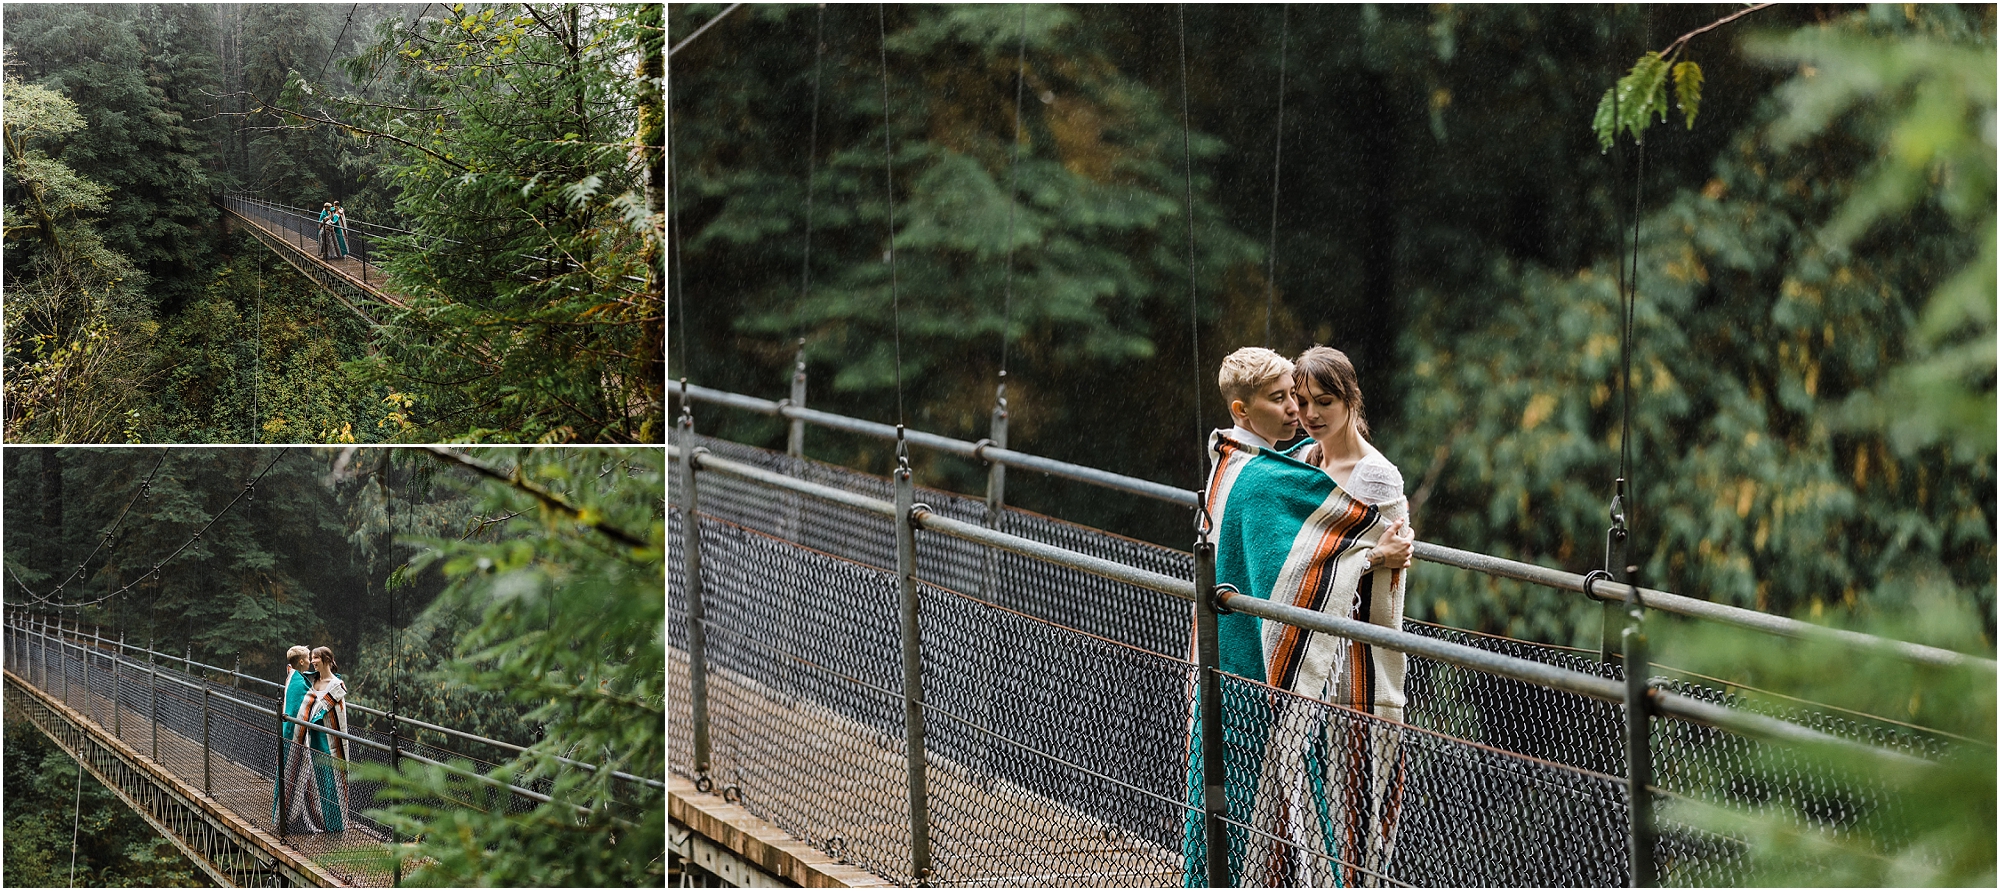 A gorgeous LGBTQ+ couple snuggles in a teal and orange wool blanket on a suspension bridge over Drift Creek Falls in Oregon as the rain falls steadily on them for their PNW hiking adventure elopement. | Erica Swantek Photography